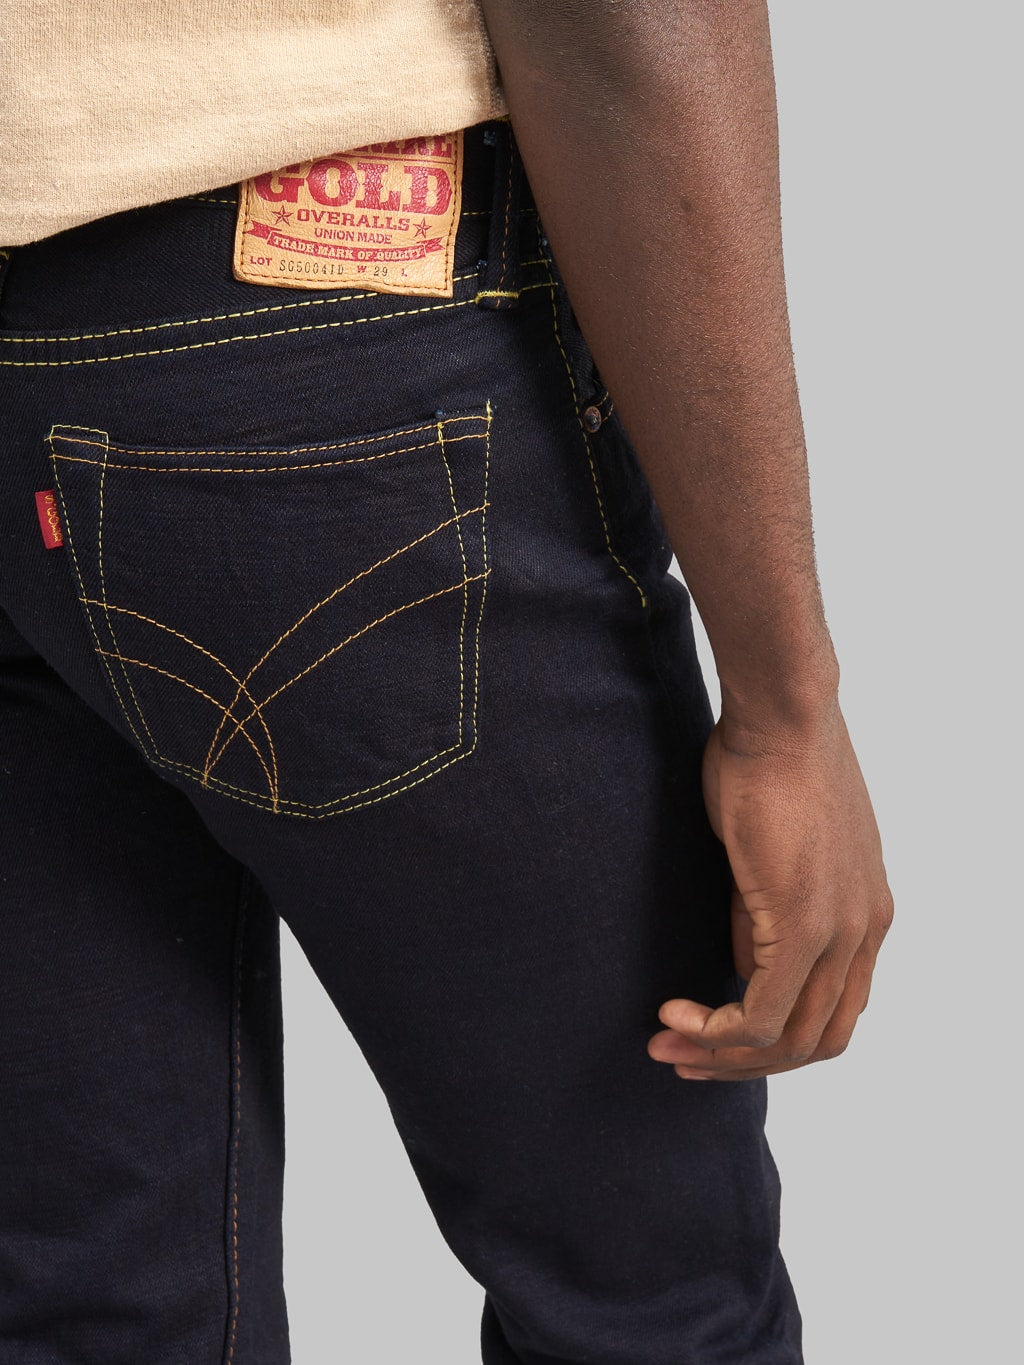 The Strike Gold 5004ID double indigo straight tapered selvedge jeans back pocket